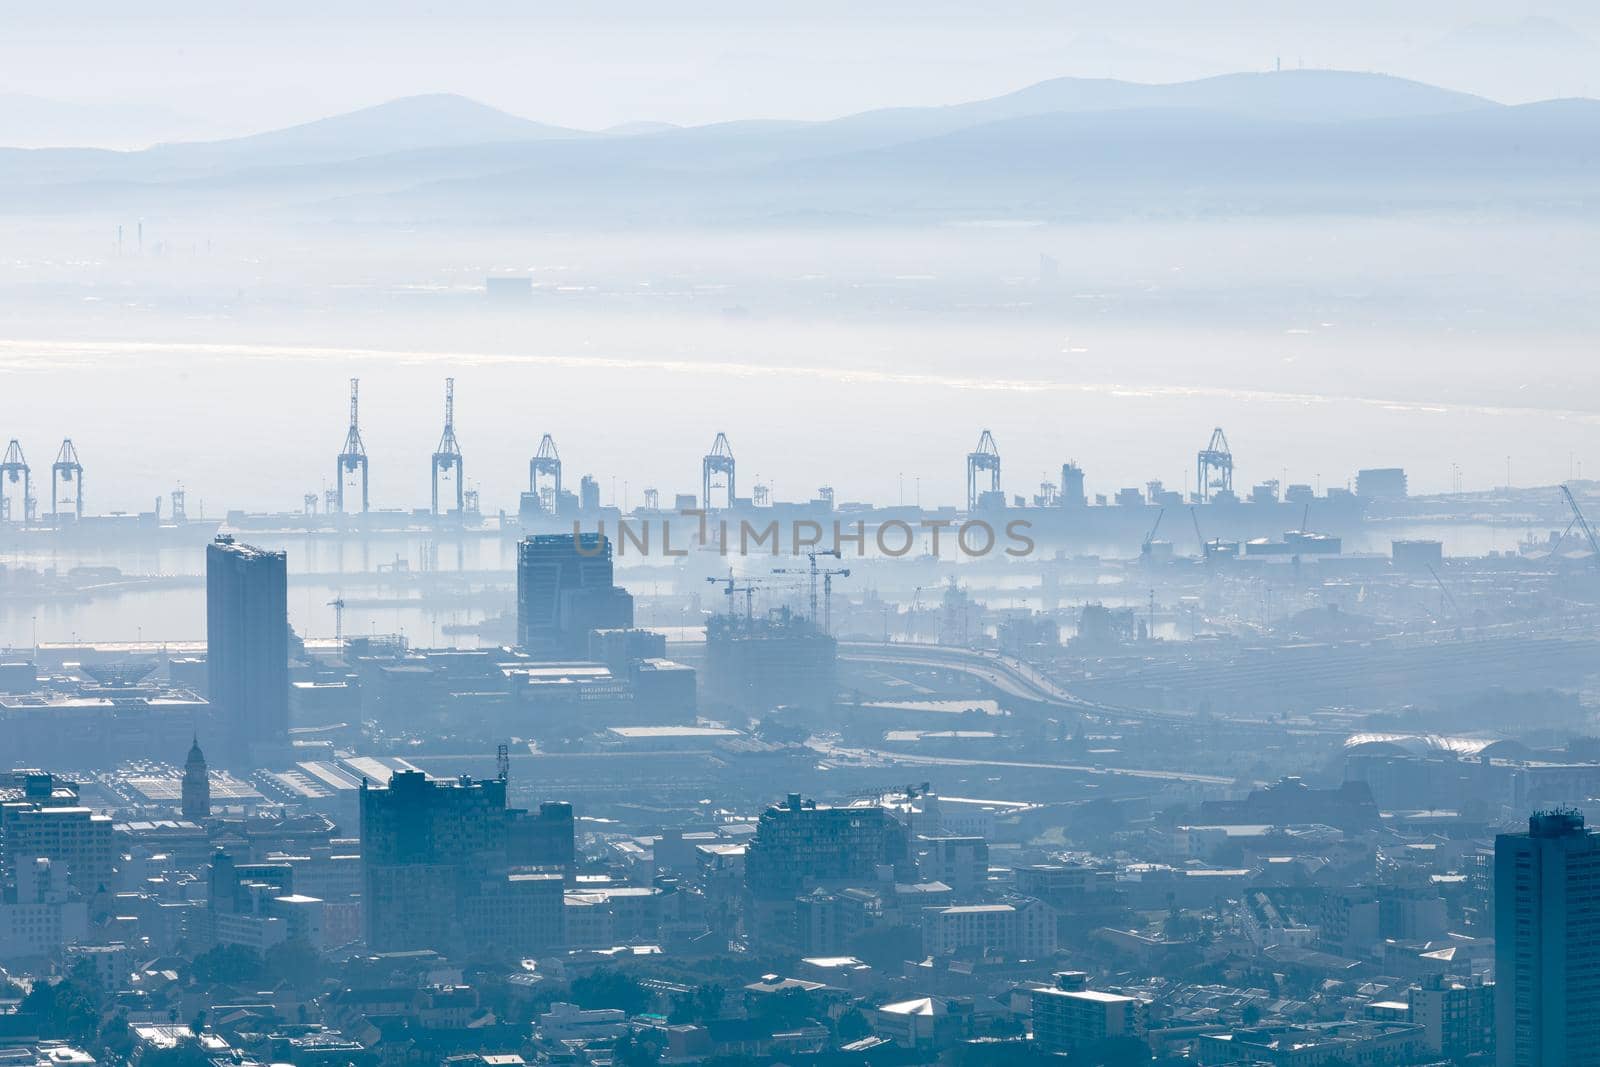 General view of cityscape with multiple modern buildings and cranes in the foggy morning. skyline and urban architecture.